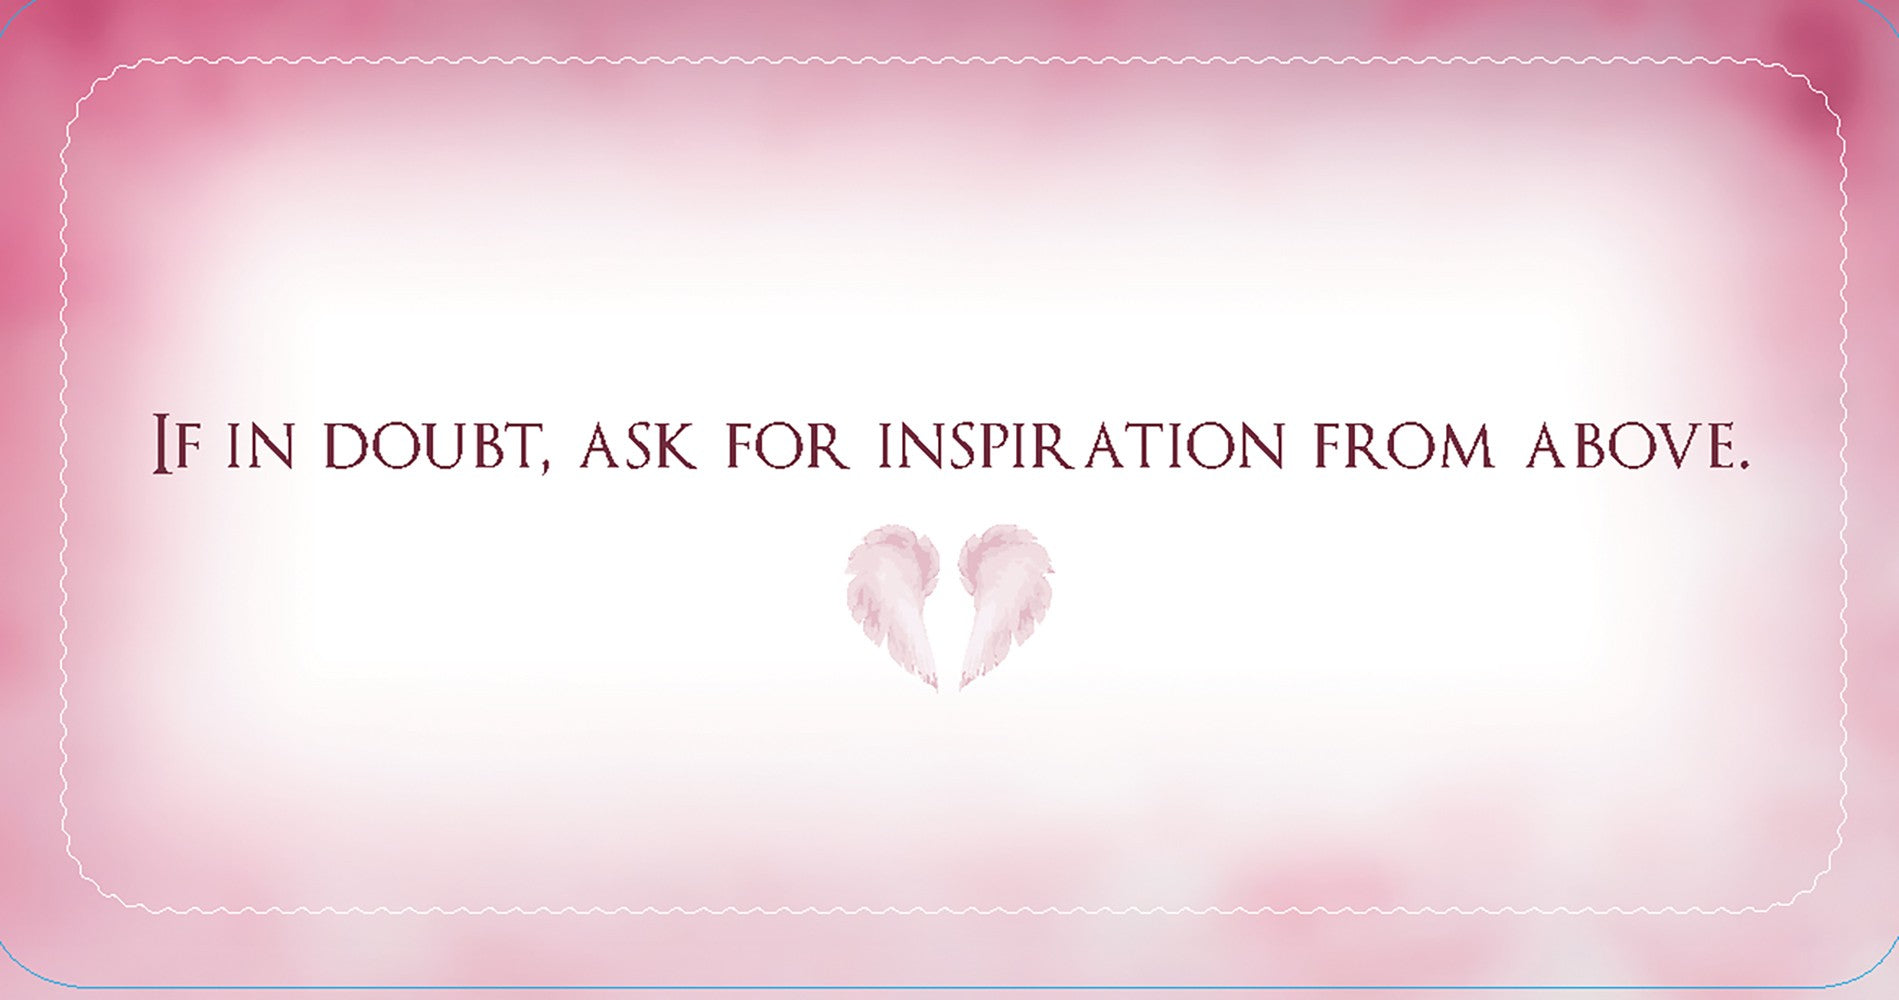 Angel Wishes Inspiration Cards